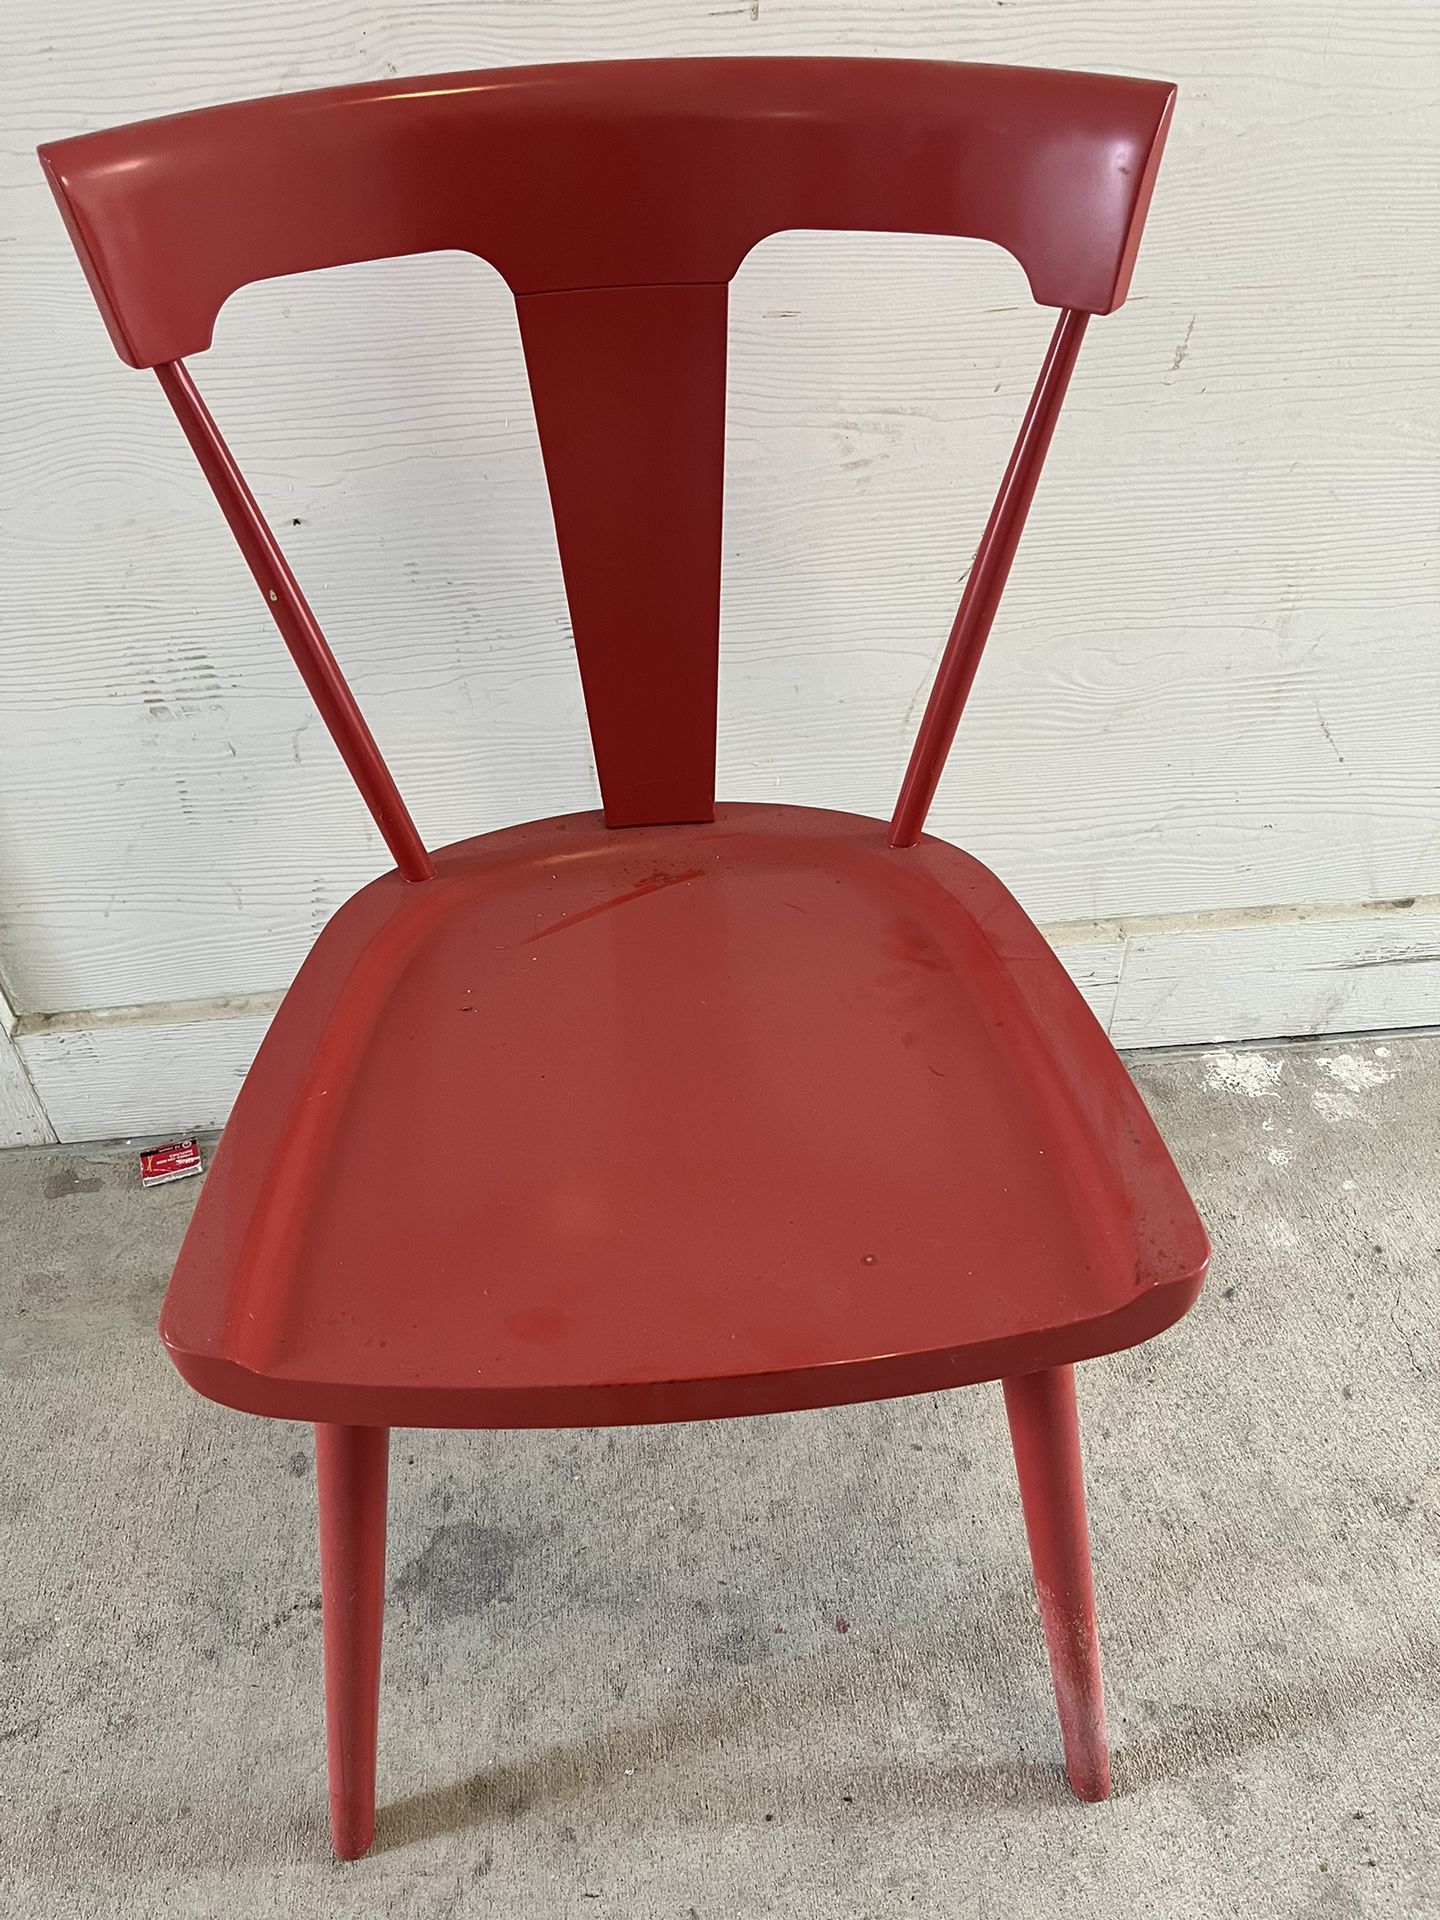 West Elm Splat Red Dining Chairs